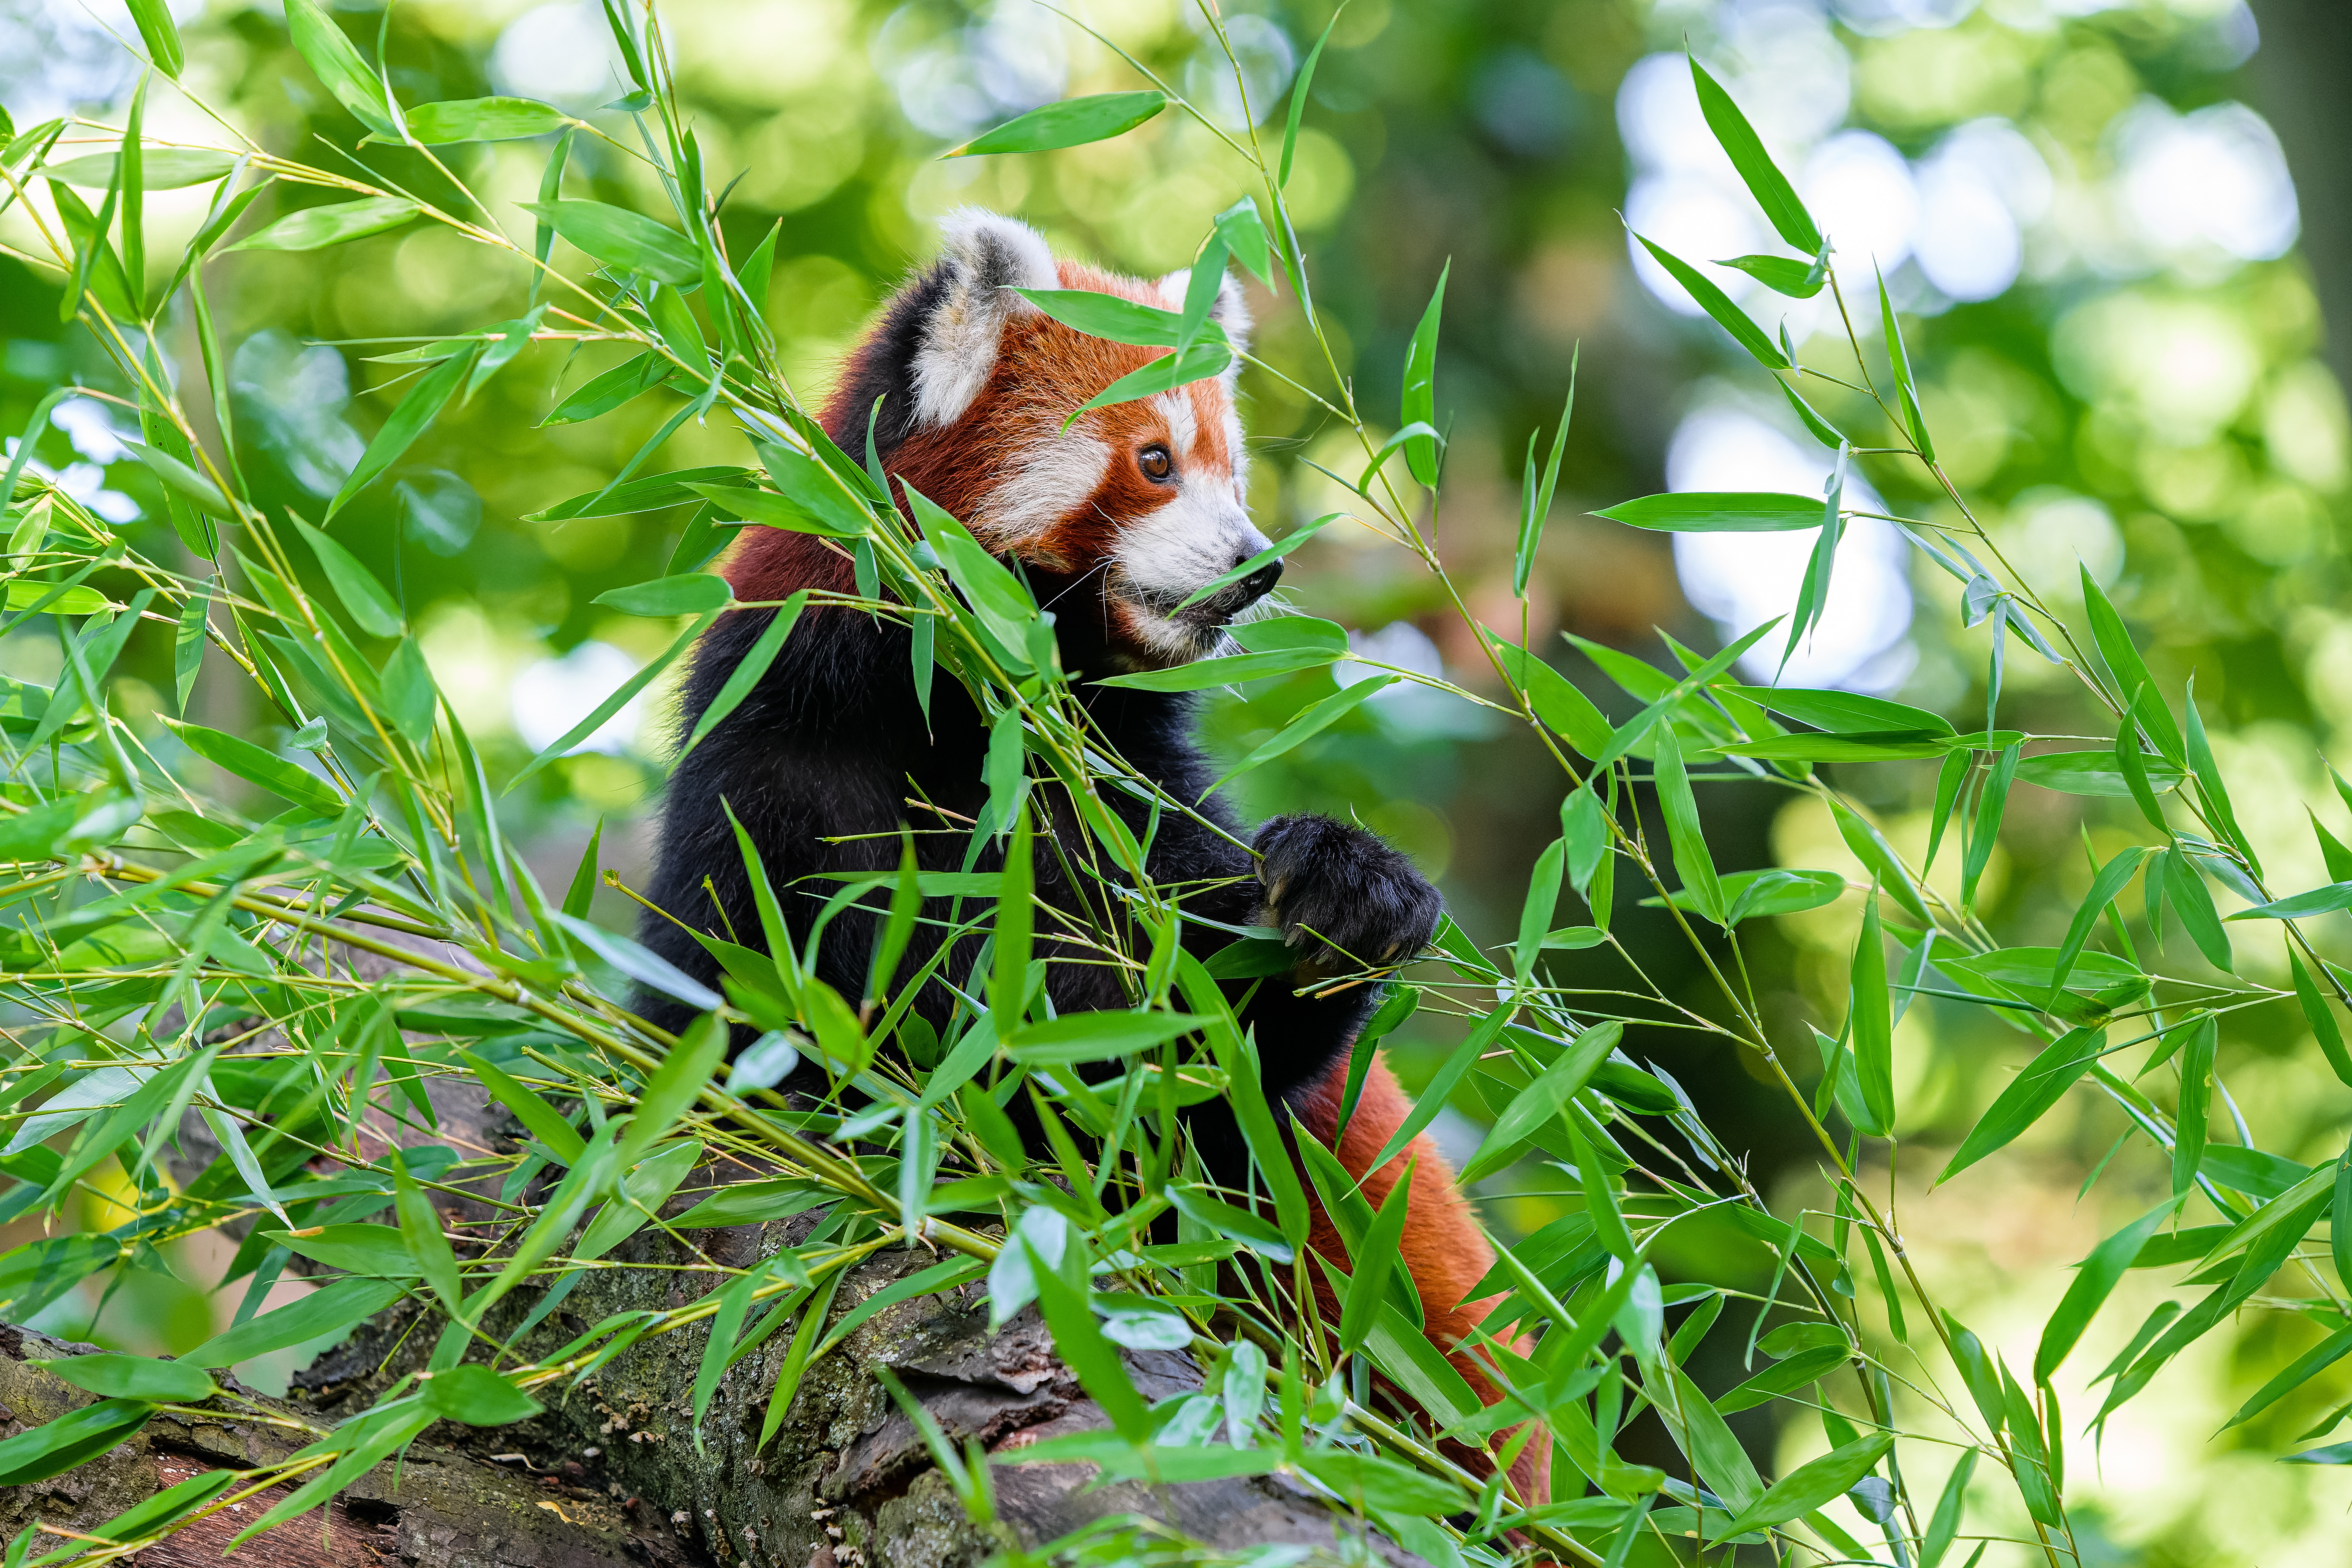 Red little panda in the grass